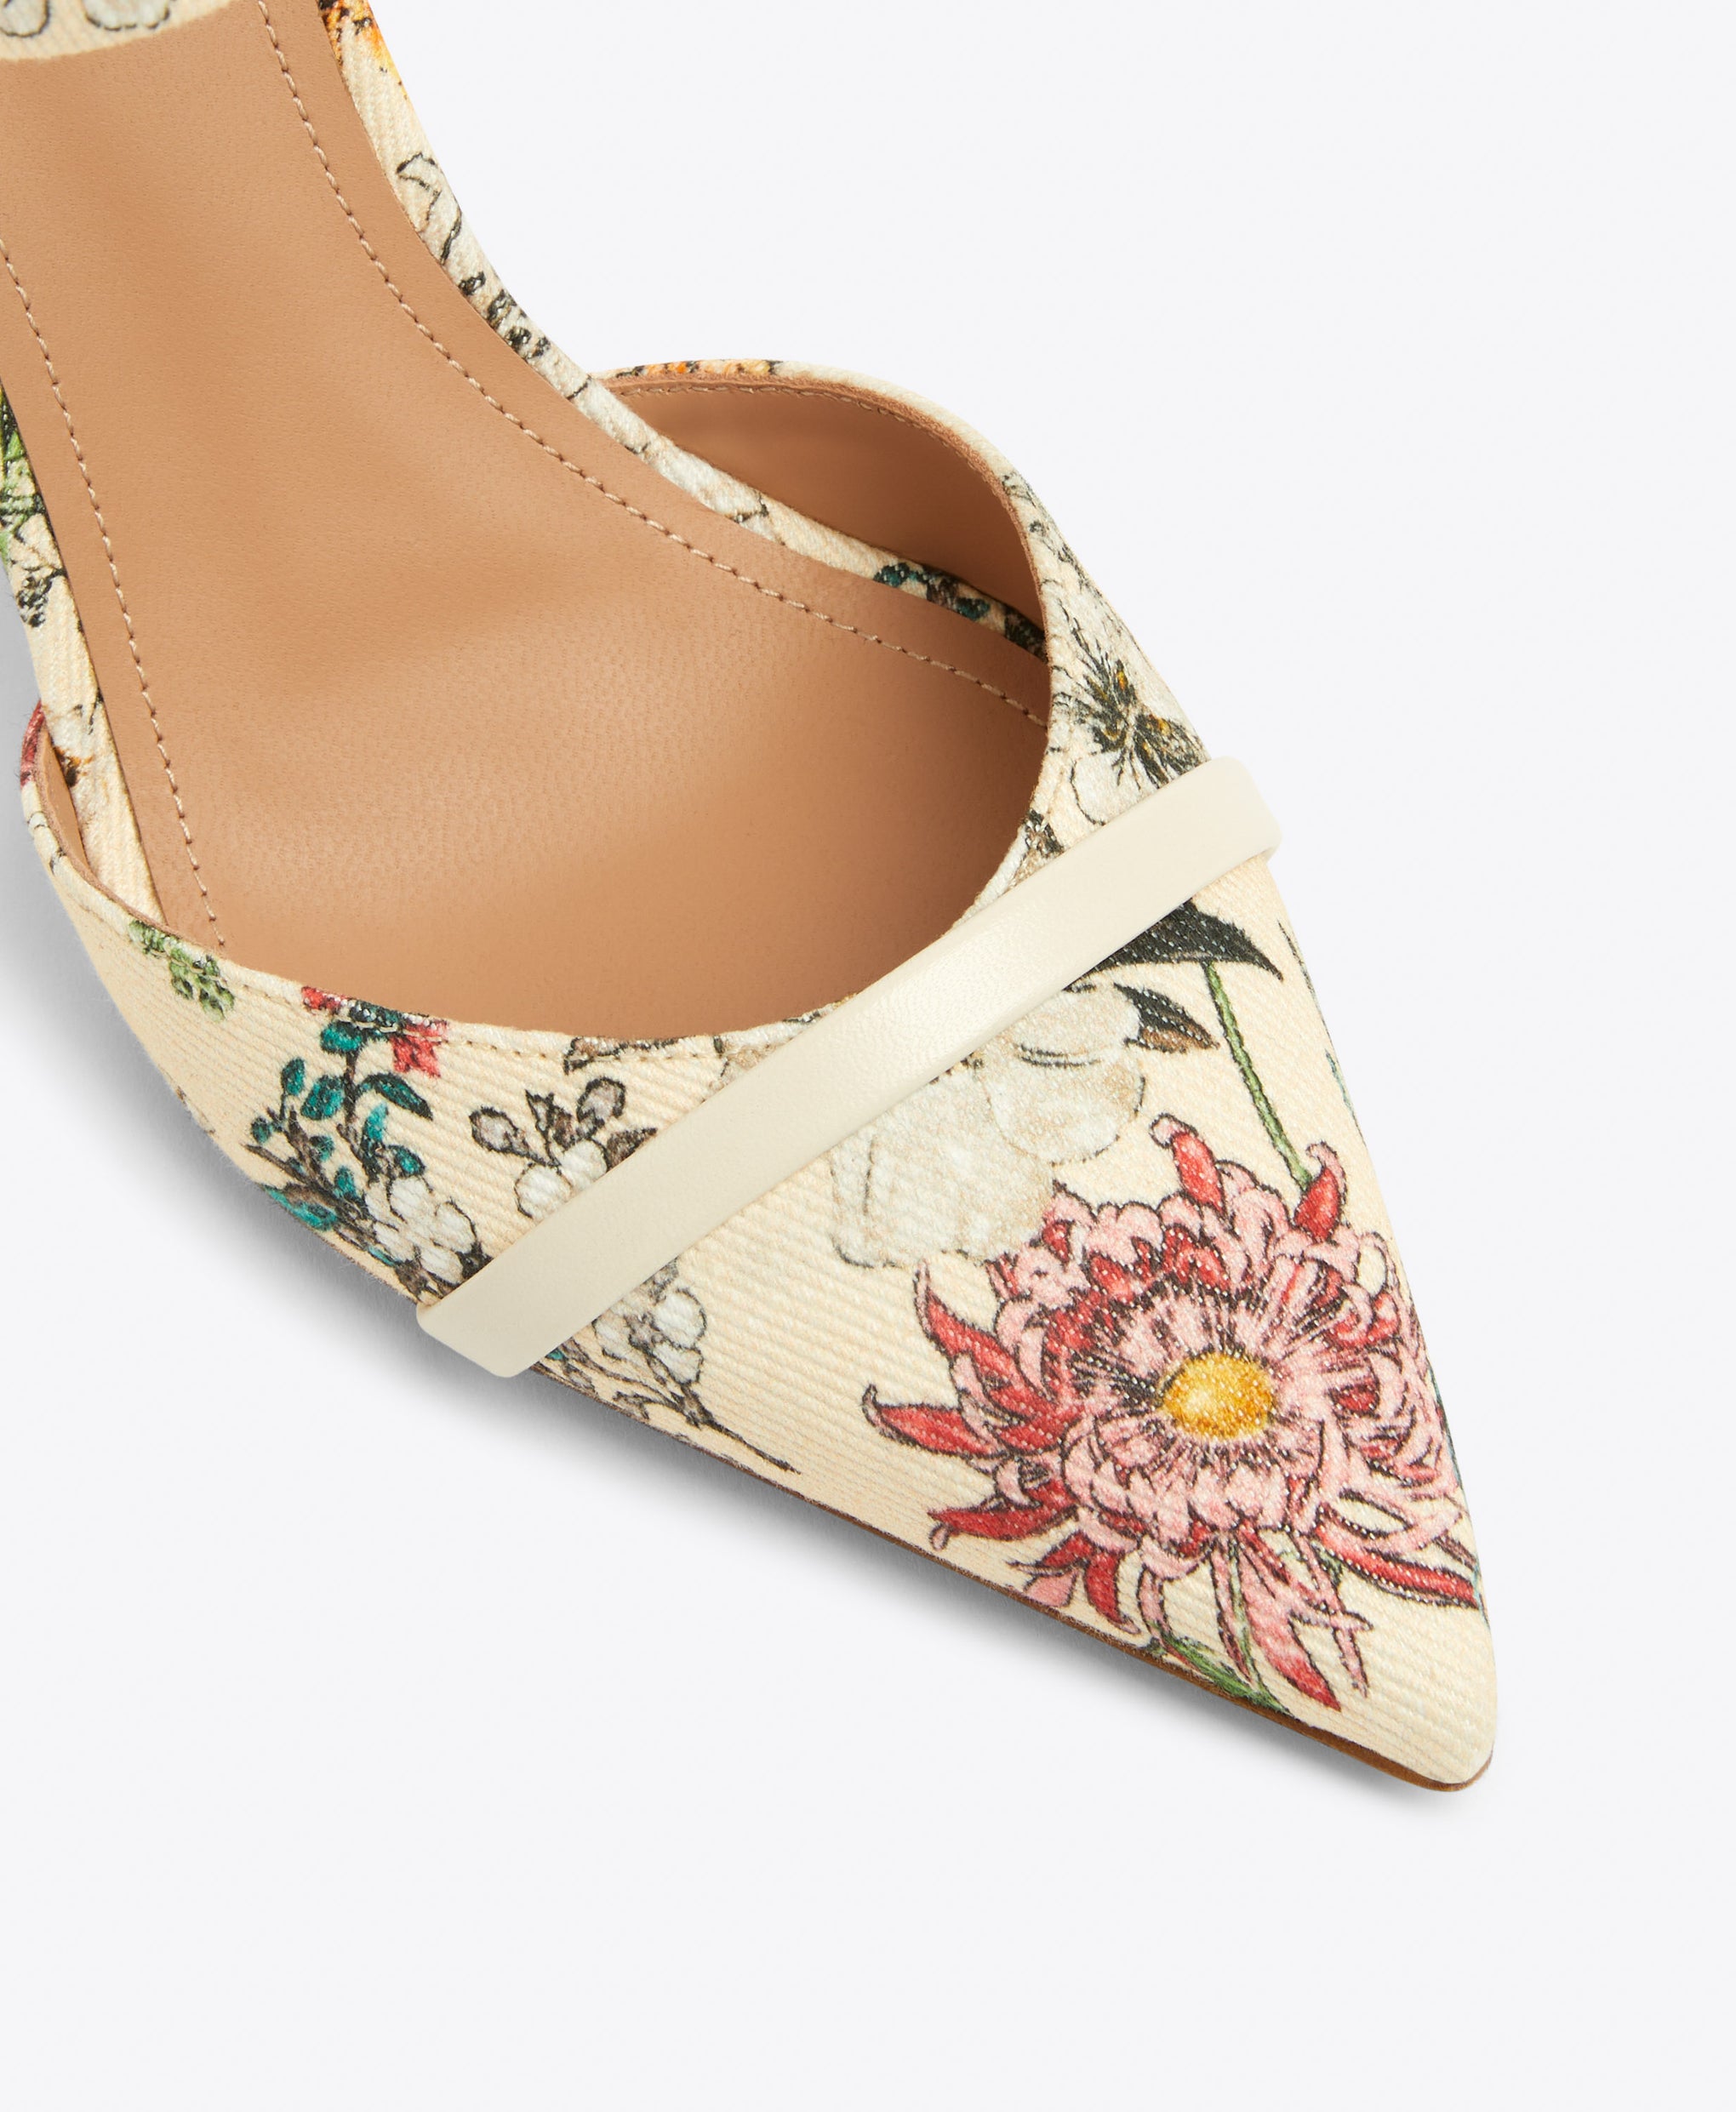 Uma 90 Floral Cream Canvas Heeled Mules Malone Souliers